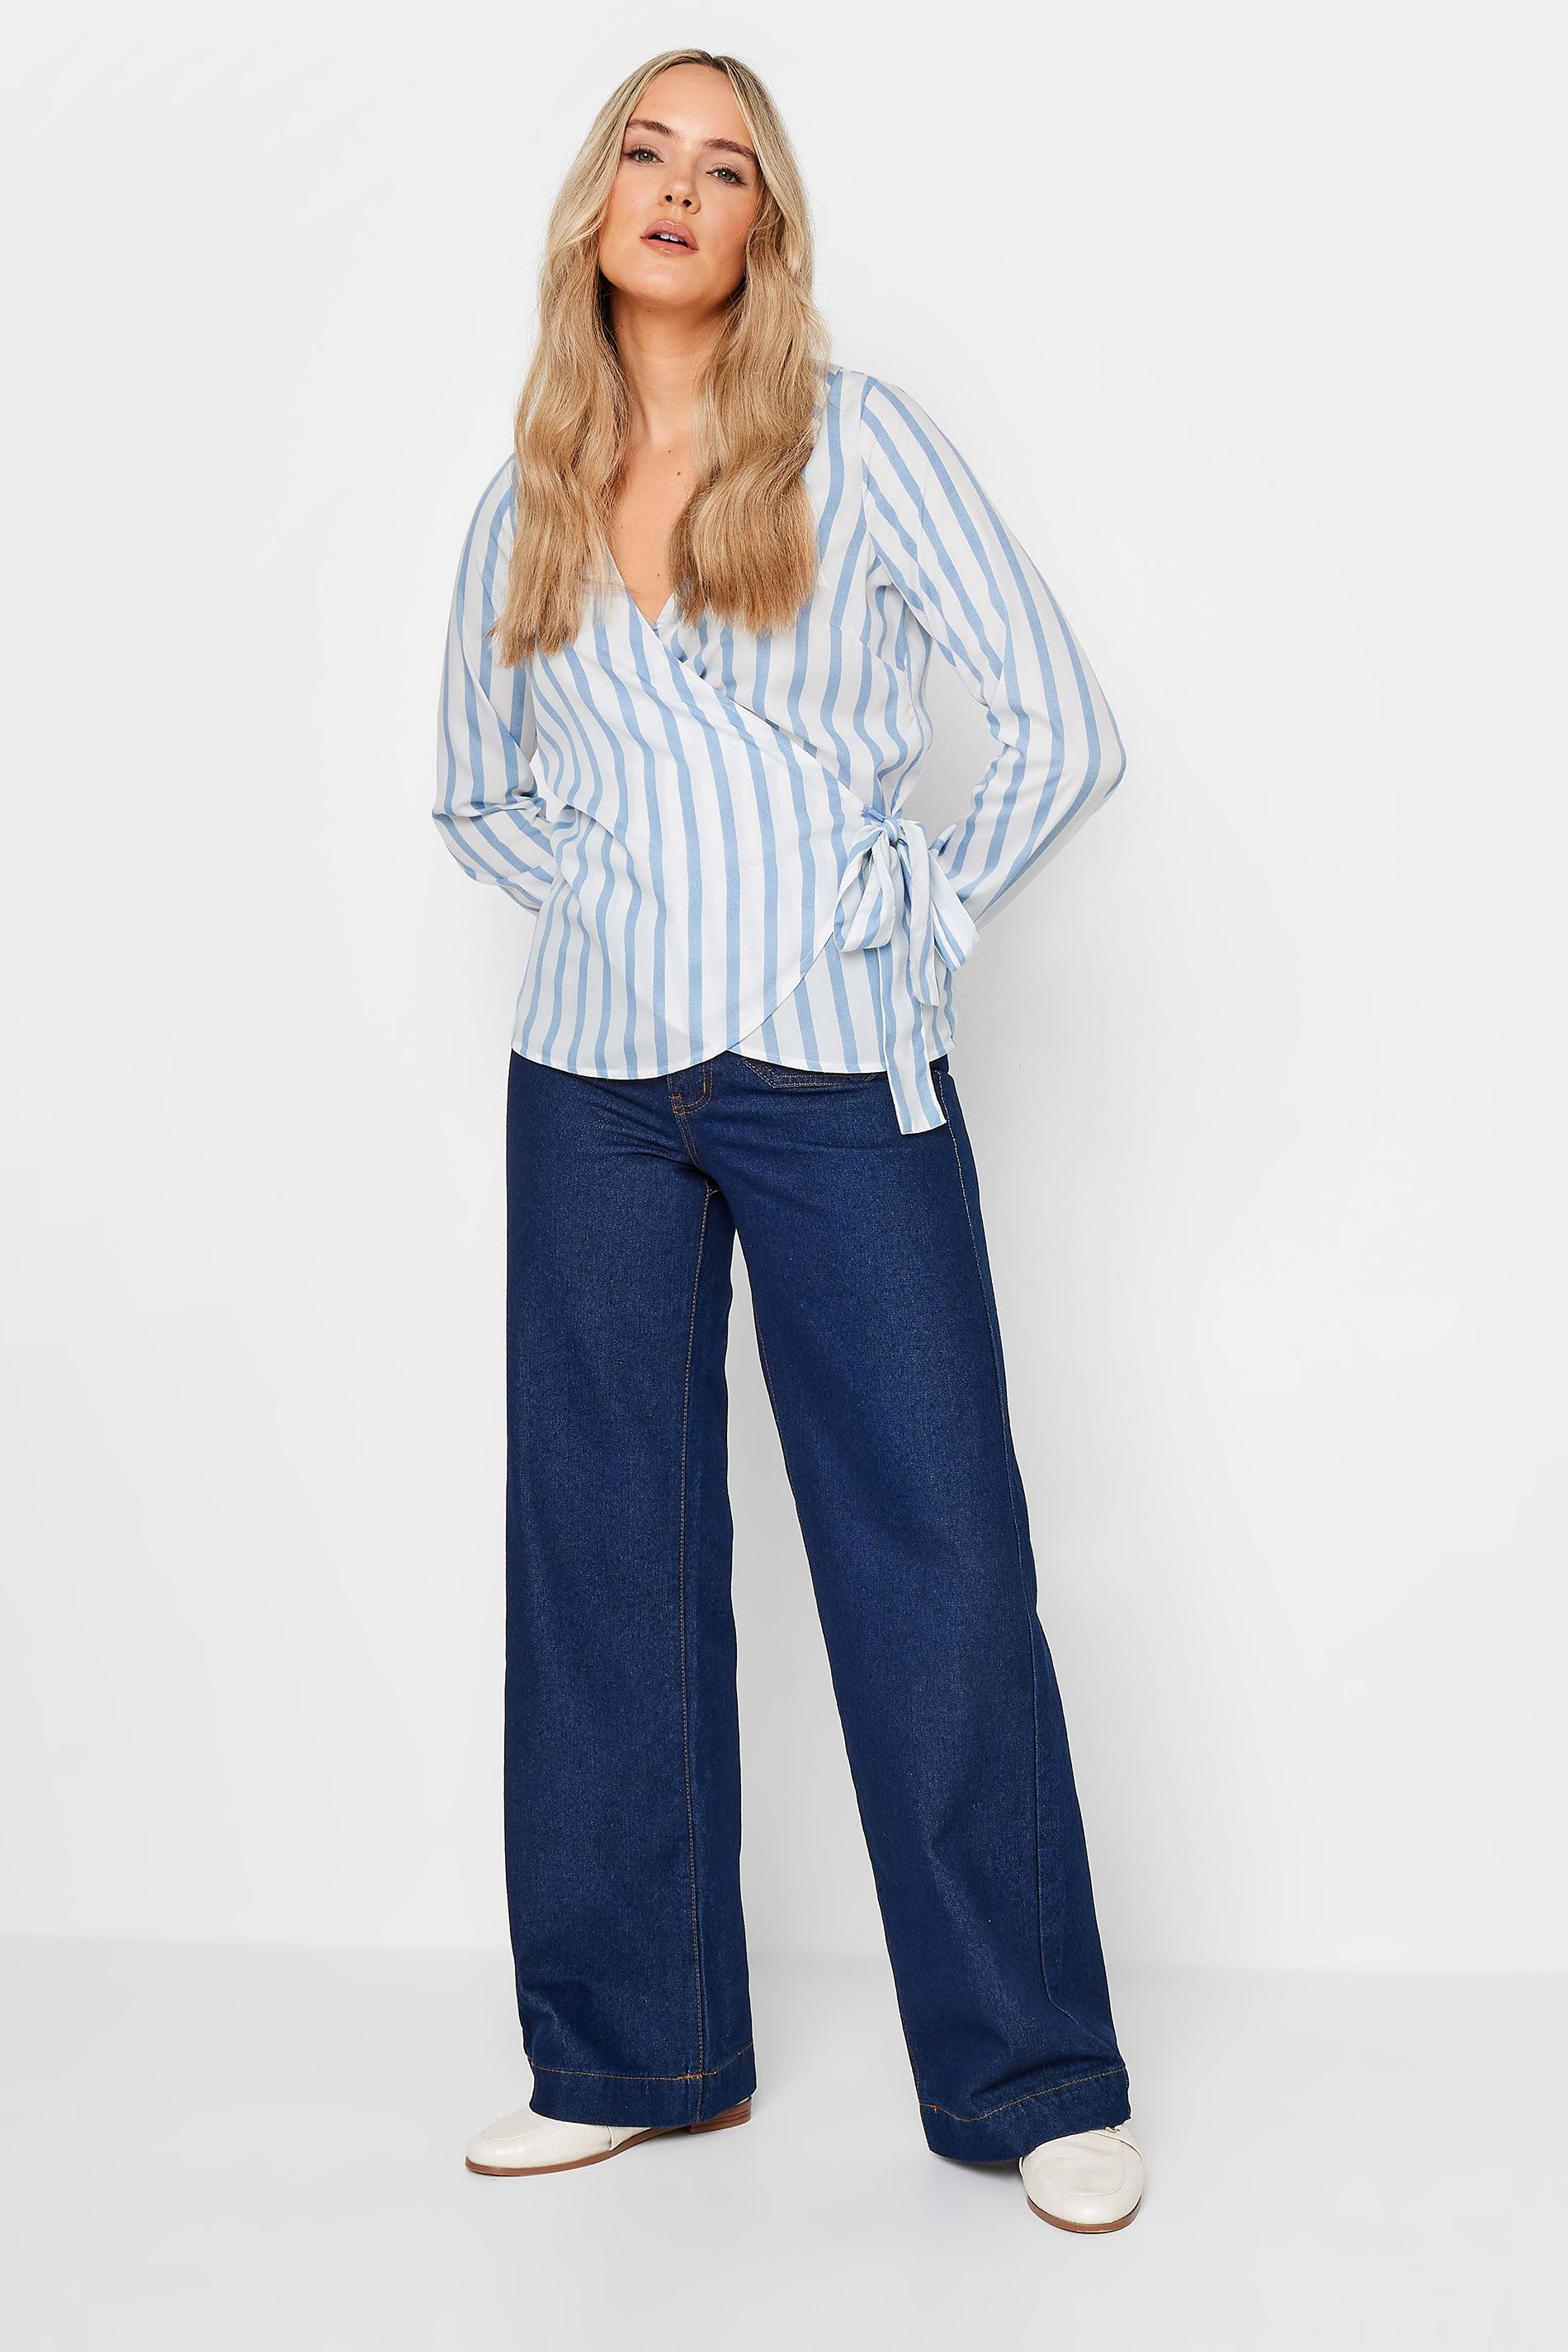 LTS Tall Womens Blue & White Stripe Collared Wrap Top | Long Tall Sally 3